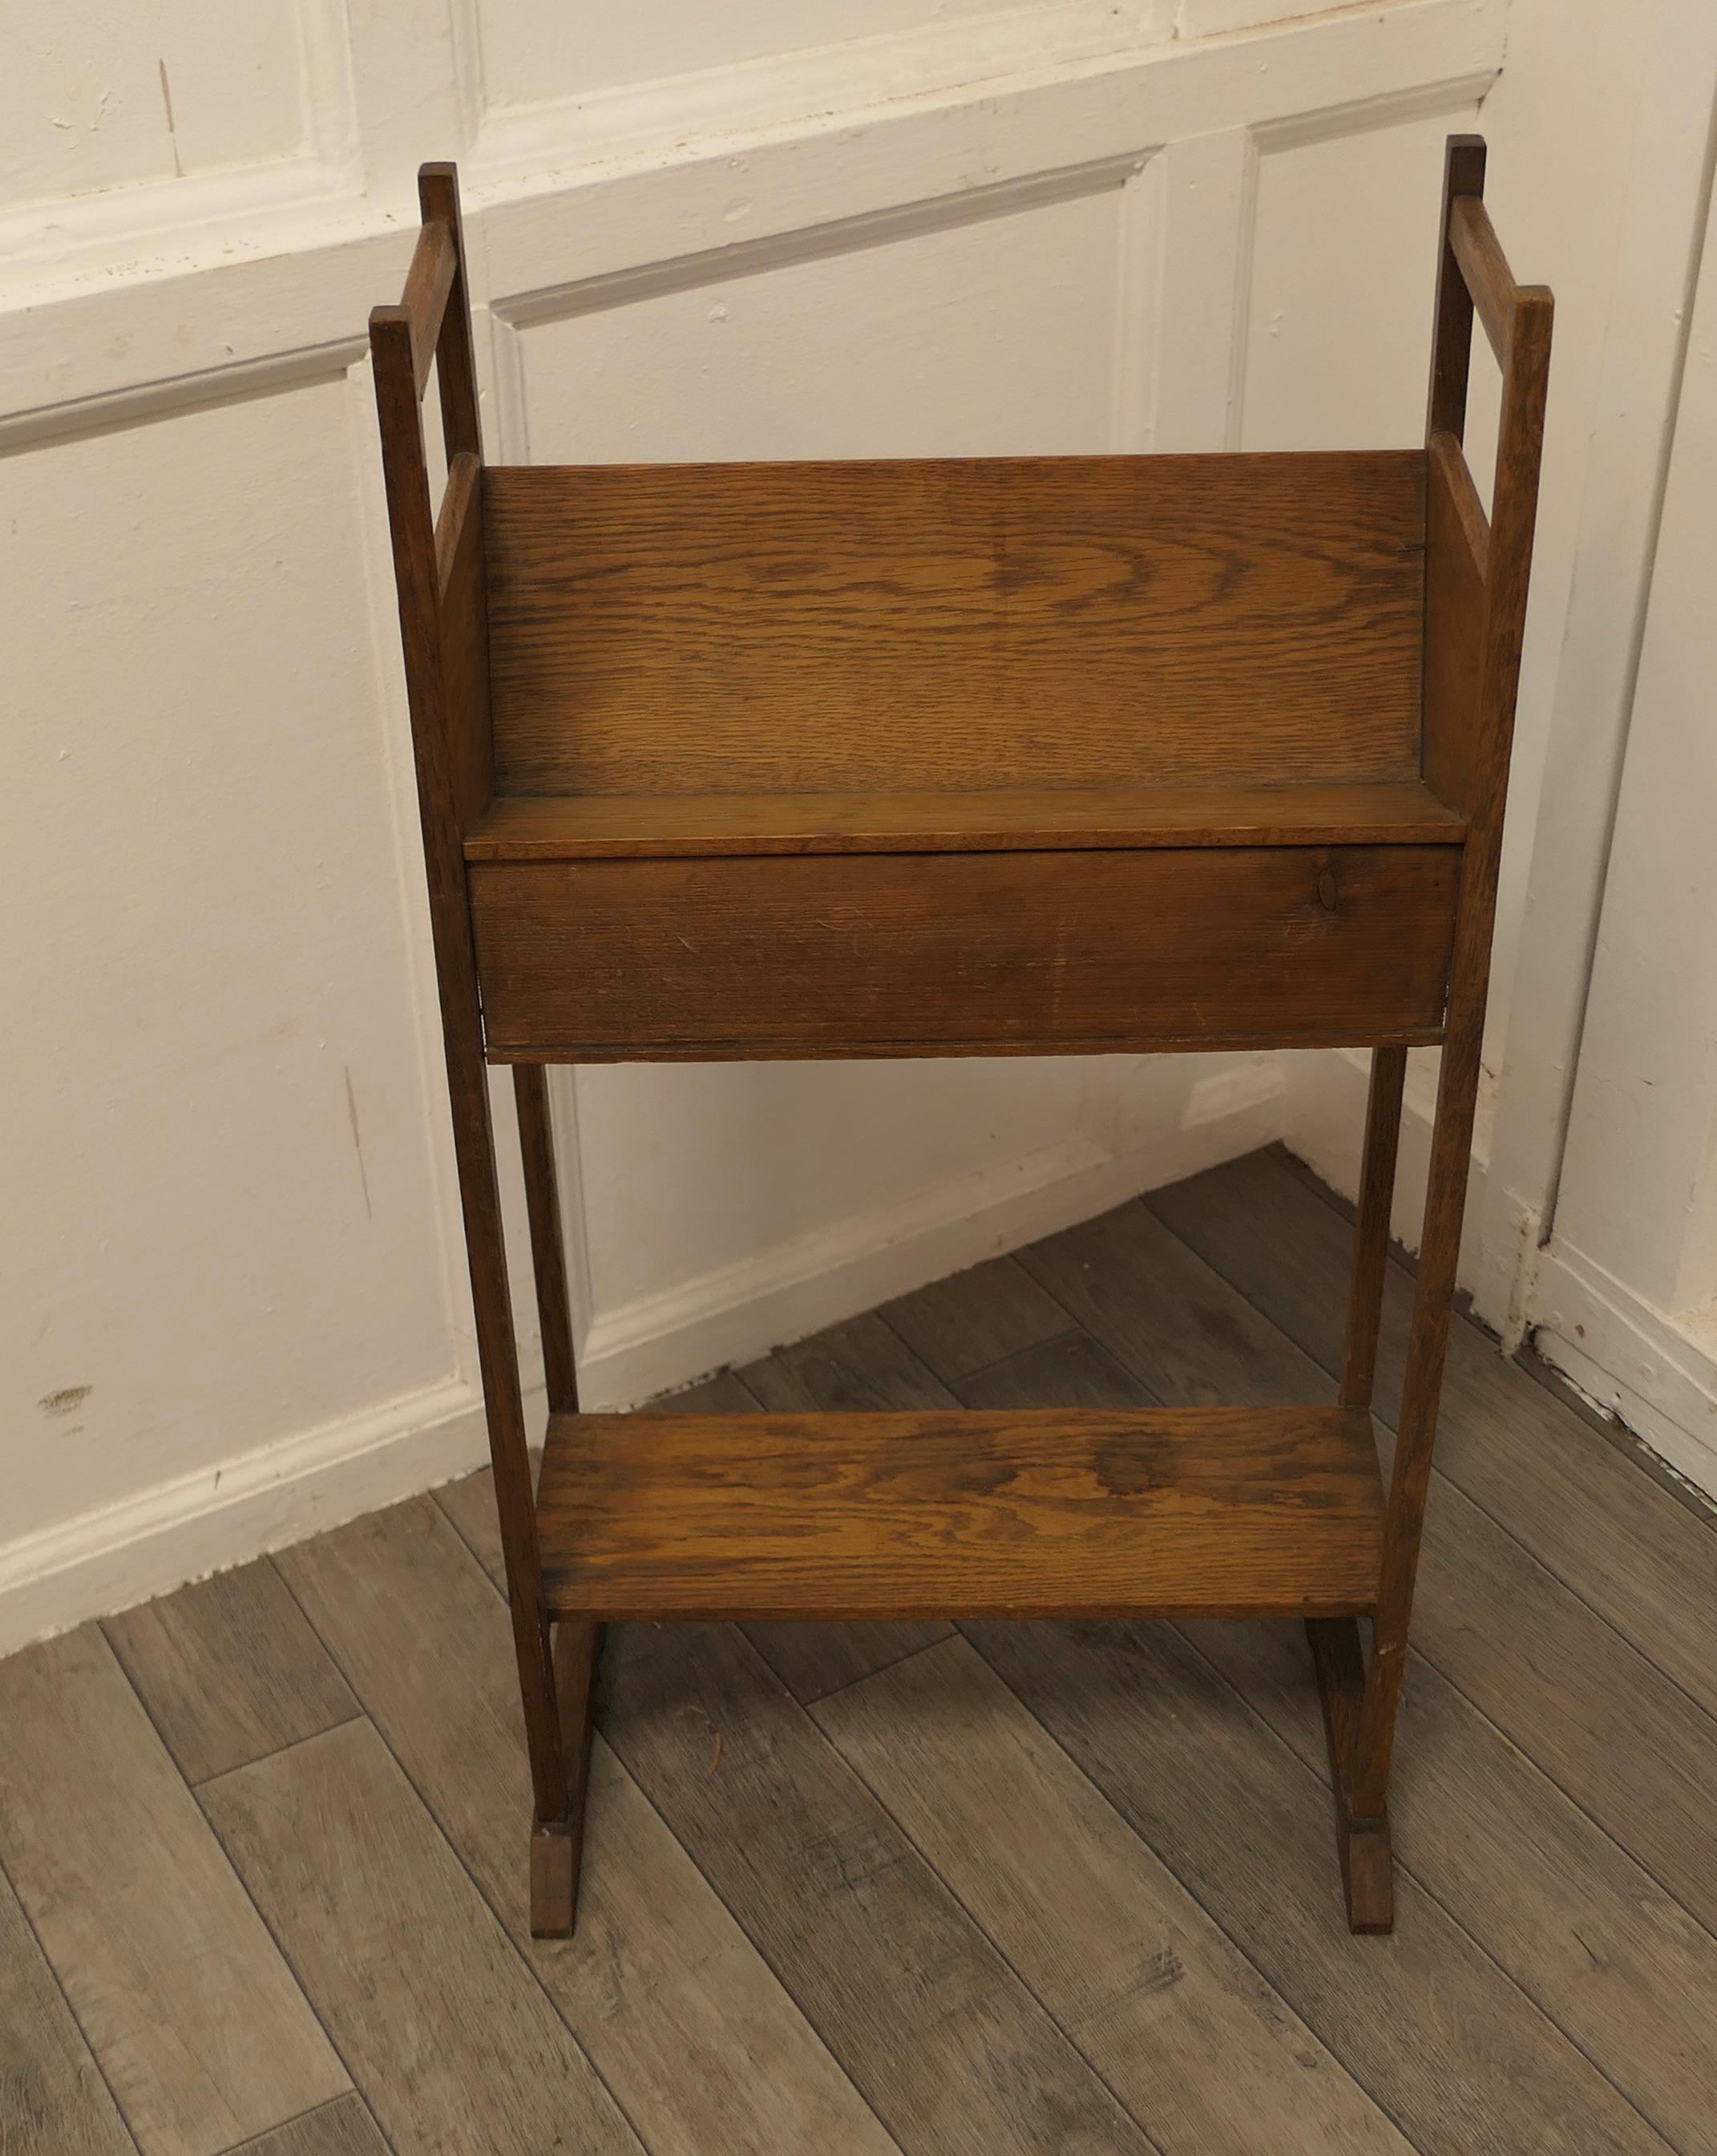 Arts & Crafts Oak Slope-Shelf Bookcase with Undertier, Small Oak Bookcase In Good Condition For Sale In Chillerton, Isle of Wight